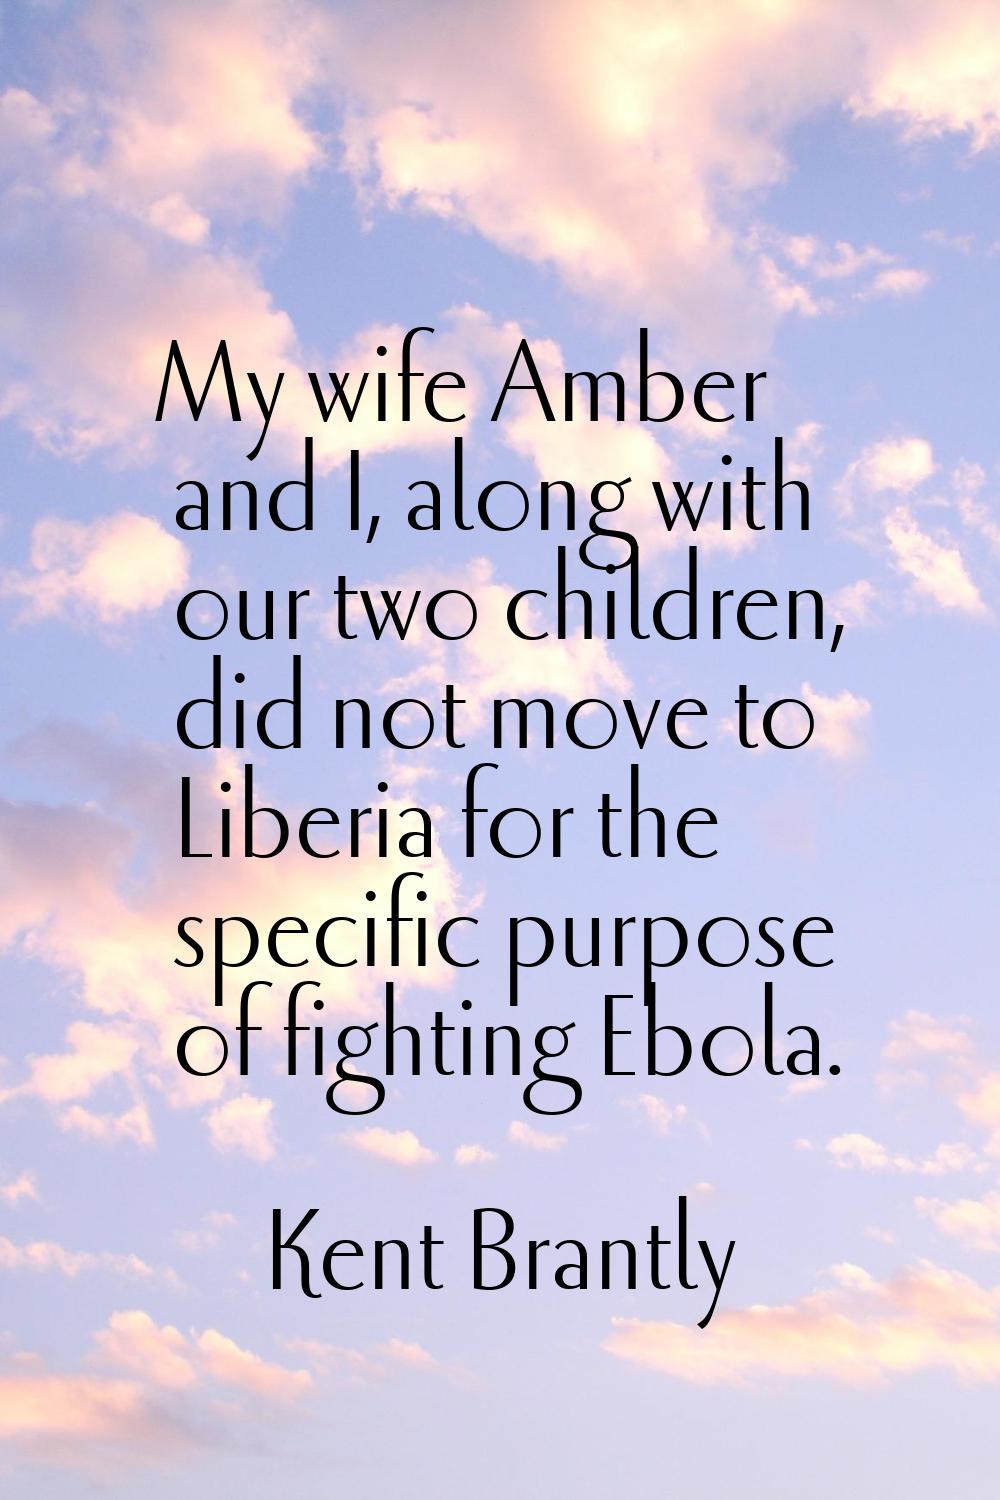 My wife Amber and I, along with our two children, did not move to Liberia for the specific purpose 